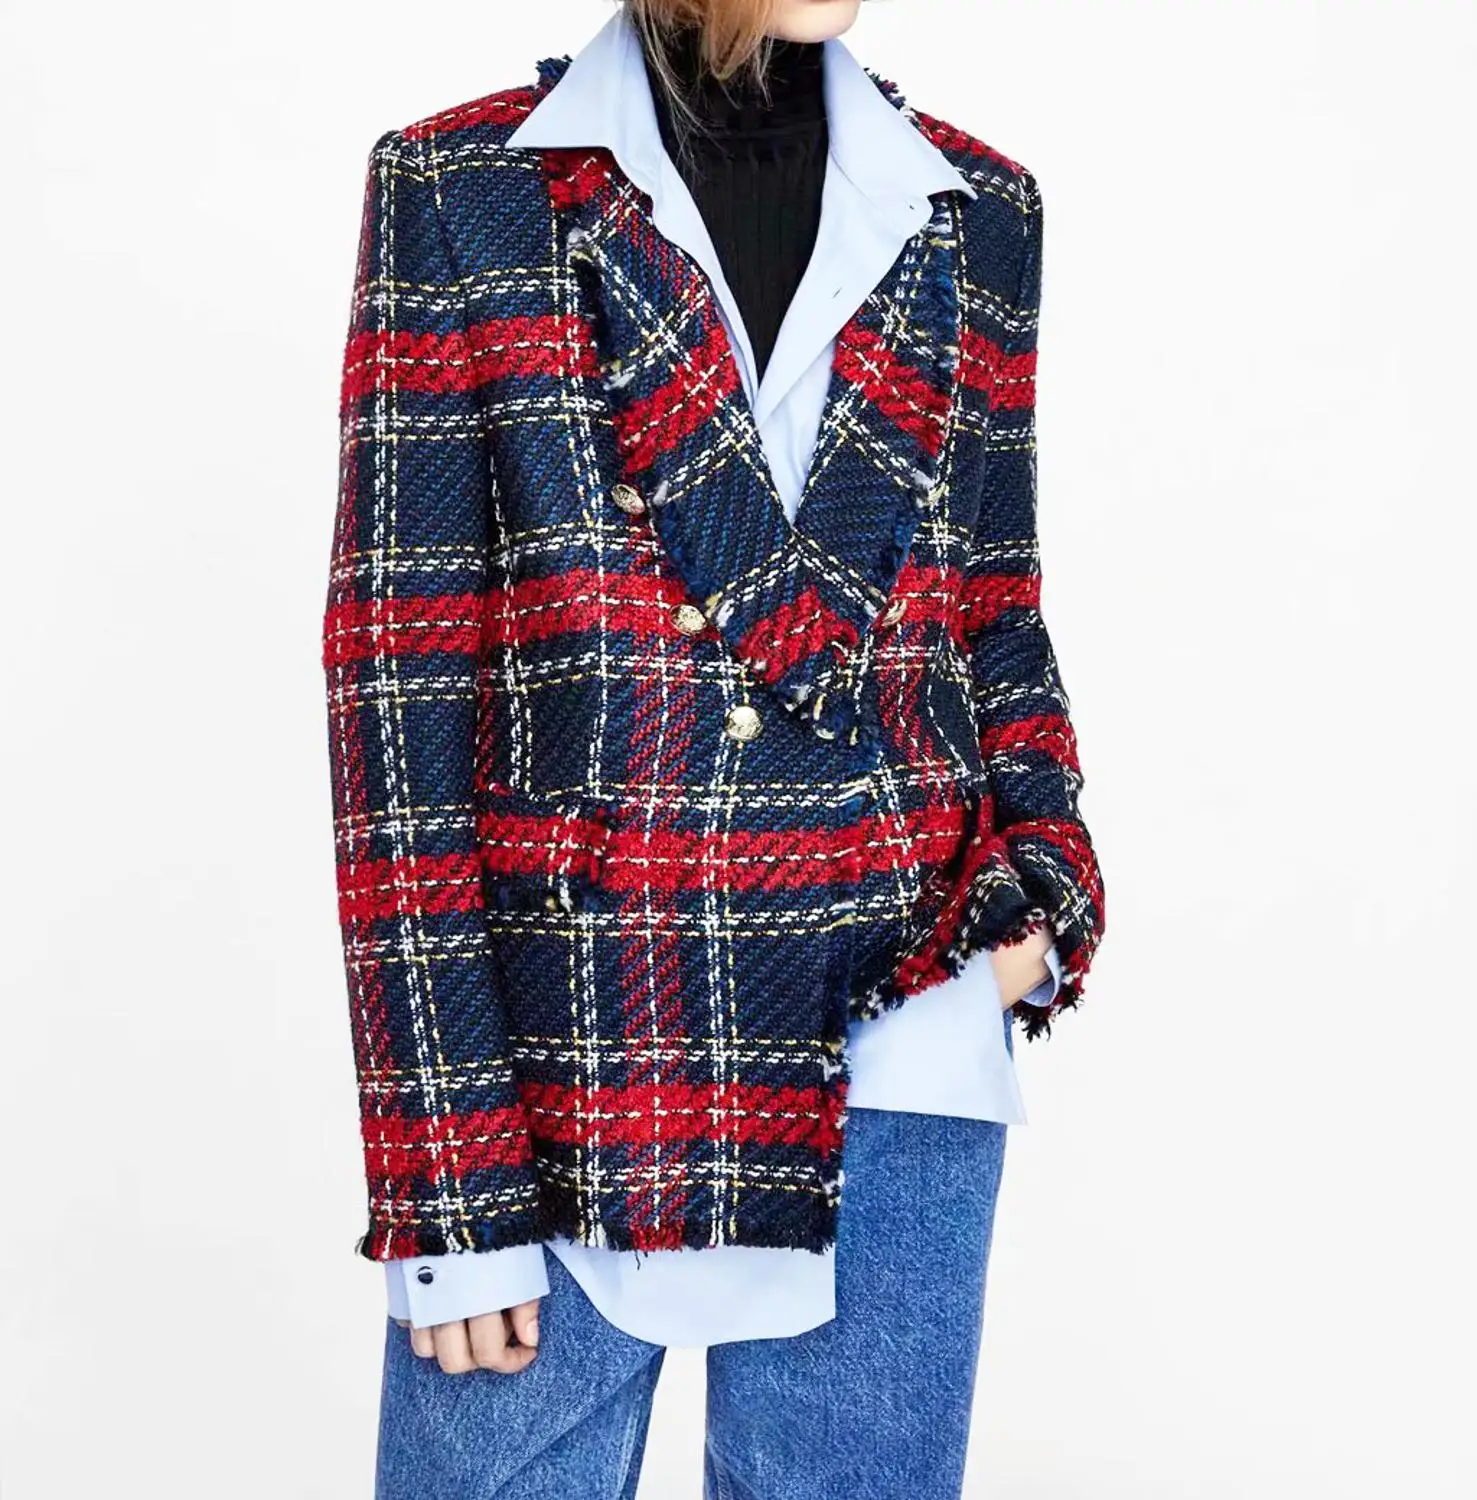 Star firefly tassel button decorated woolen suit female autumn casual tweed plaid blazer for official business women